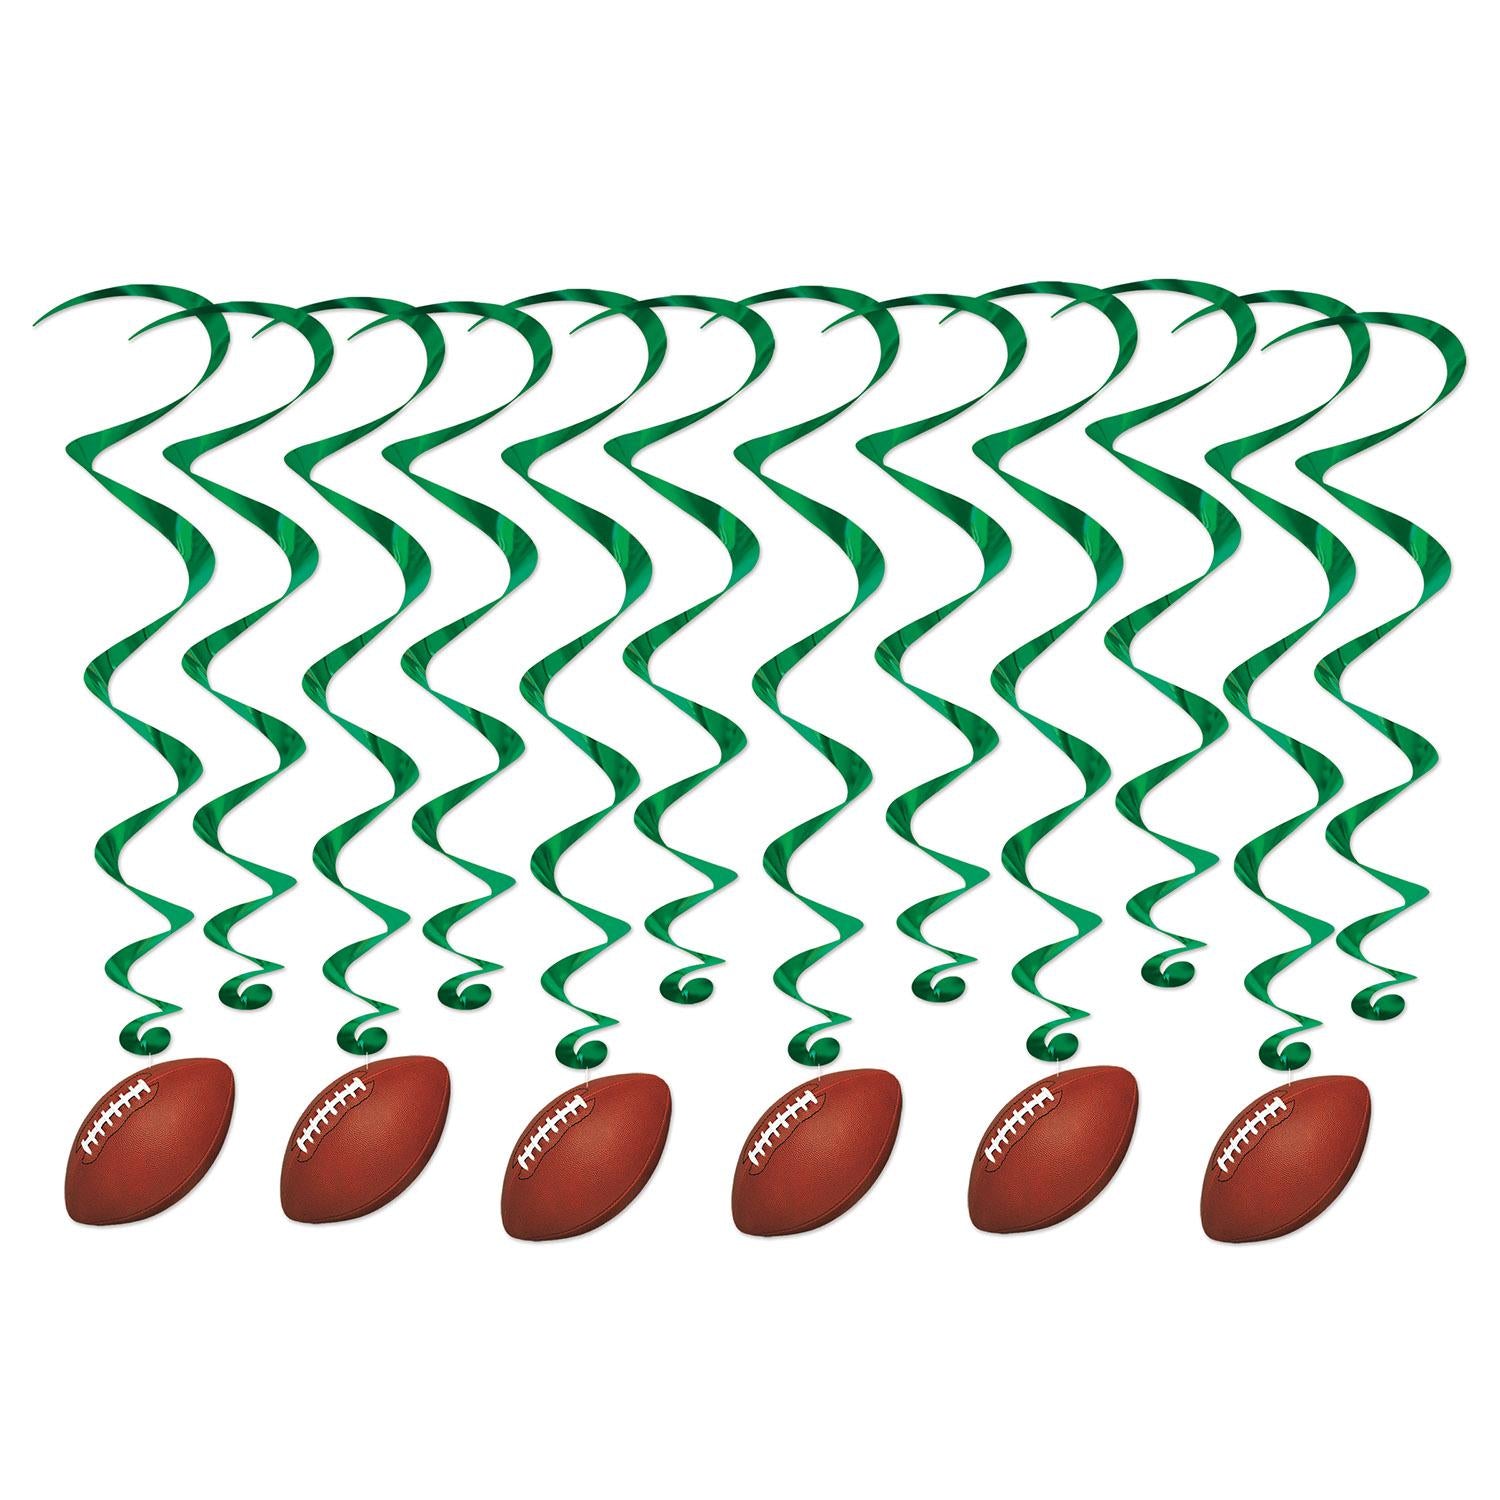 Beistle Football Party Whirls (12/Pkg)